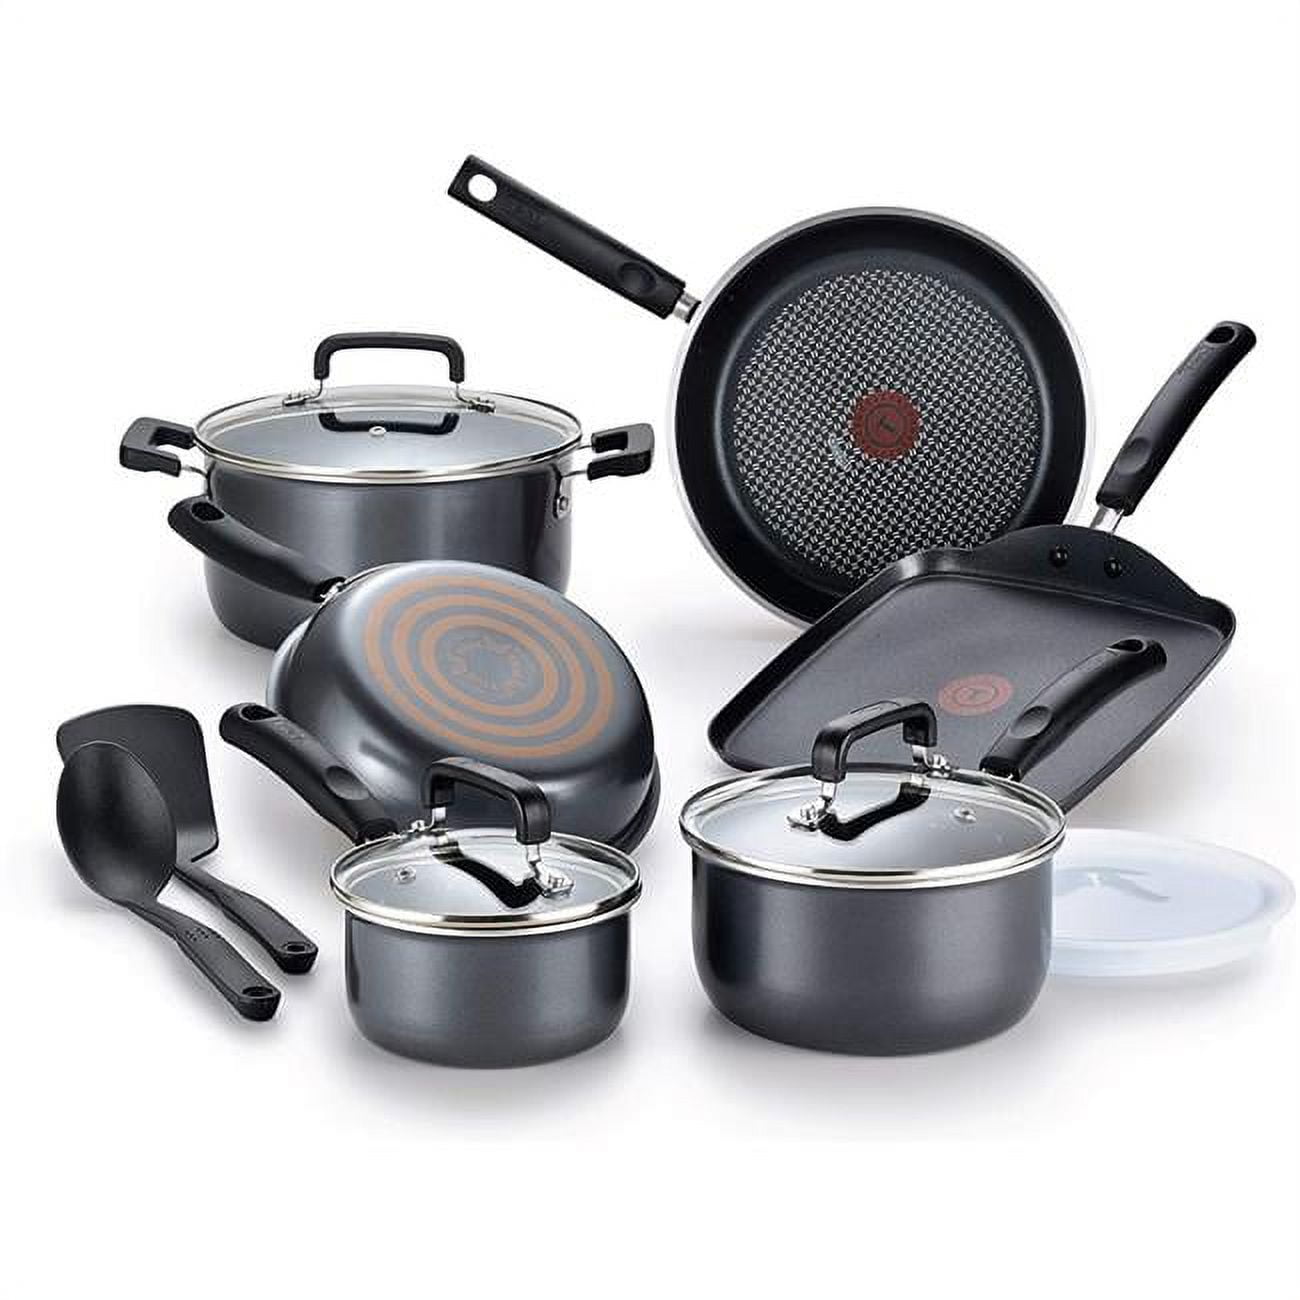 T-FAL T-fal Fresh Gourmet Ceramic 12-Piece Recycled Ceramic Non-Stick pots  and pans Cookware Set, Grey C588SC64